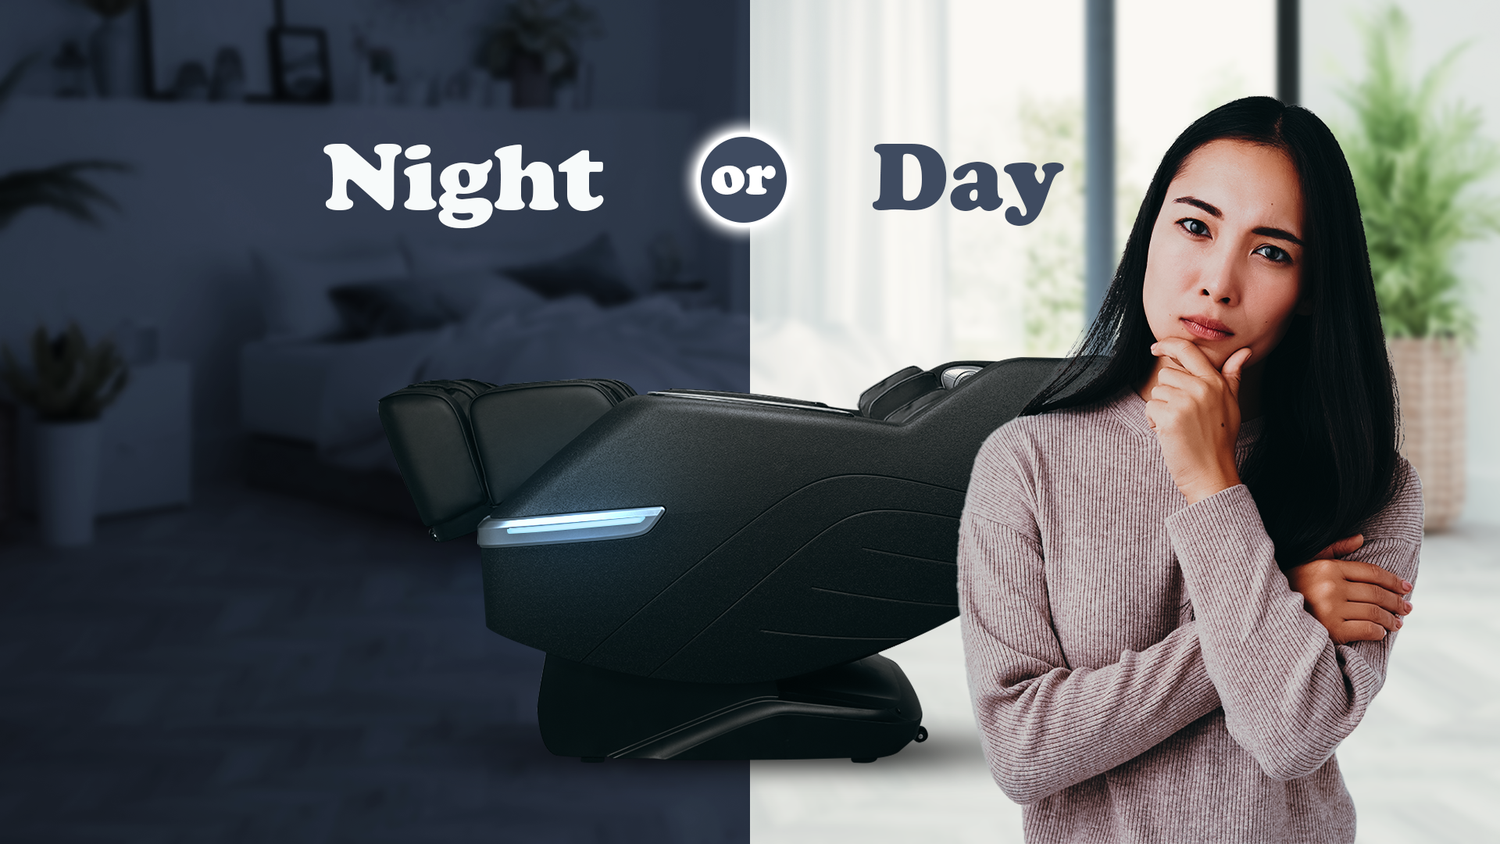 When is the best time to use a Massage Chair: In the morning, or at night?